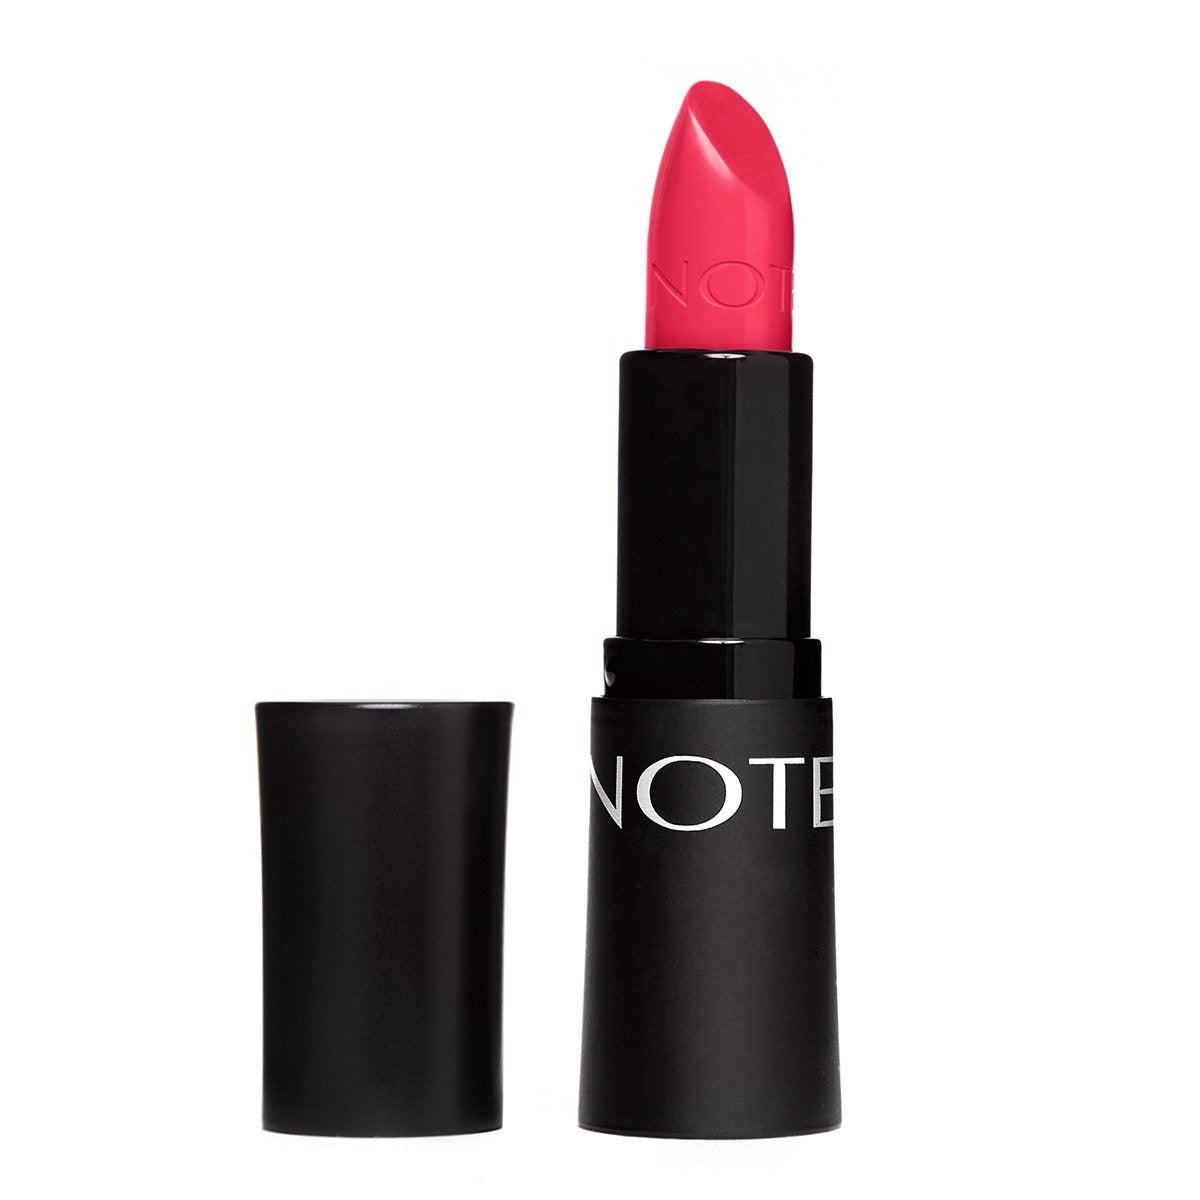 NOTE ULTRA RICH COLOR LIPSTICK - 14 PINK MARBLE - Halal Lipstick, Vegan Lipstick, Cruelty Free Lipstick, Paraben Free Lipstick, Pigmented, Nourishing, Moisturising